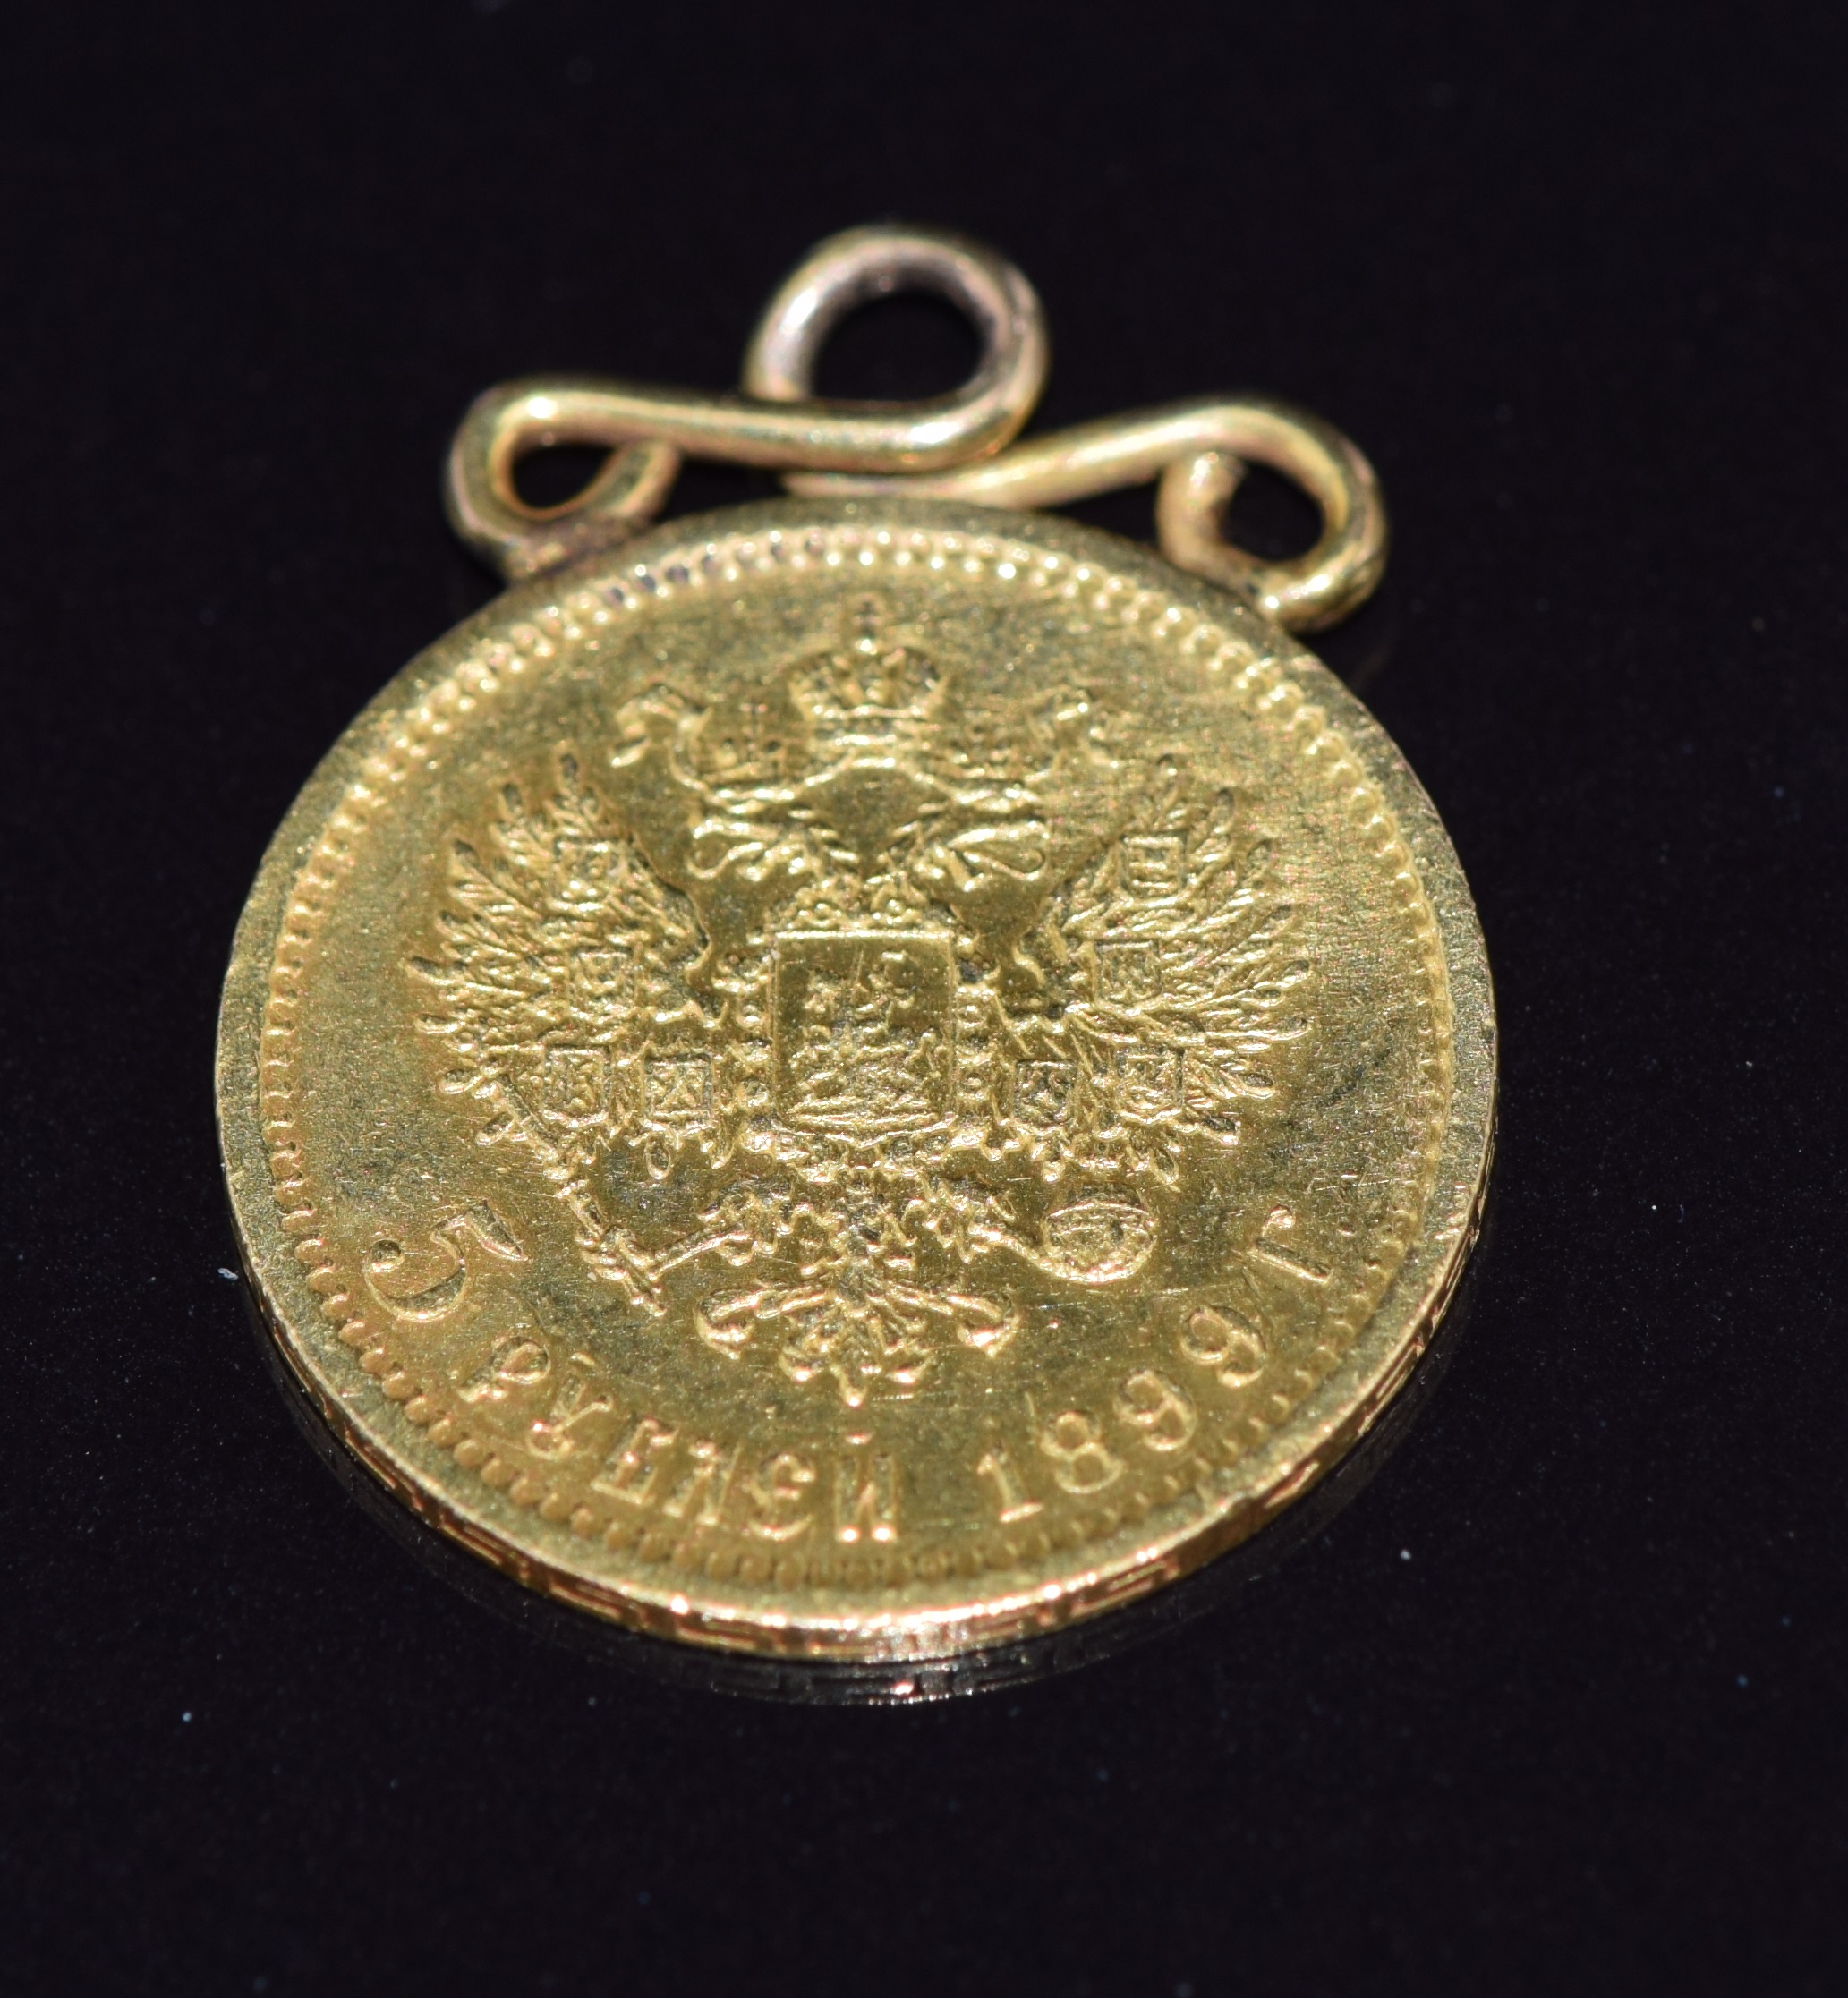 Nicholas II 1899 Russian gold 5 ruble coin with pendant mount 4.5g